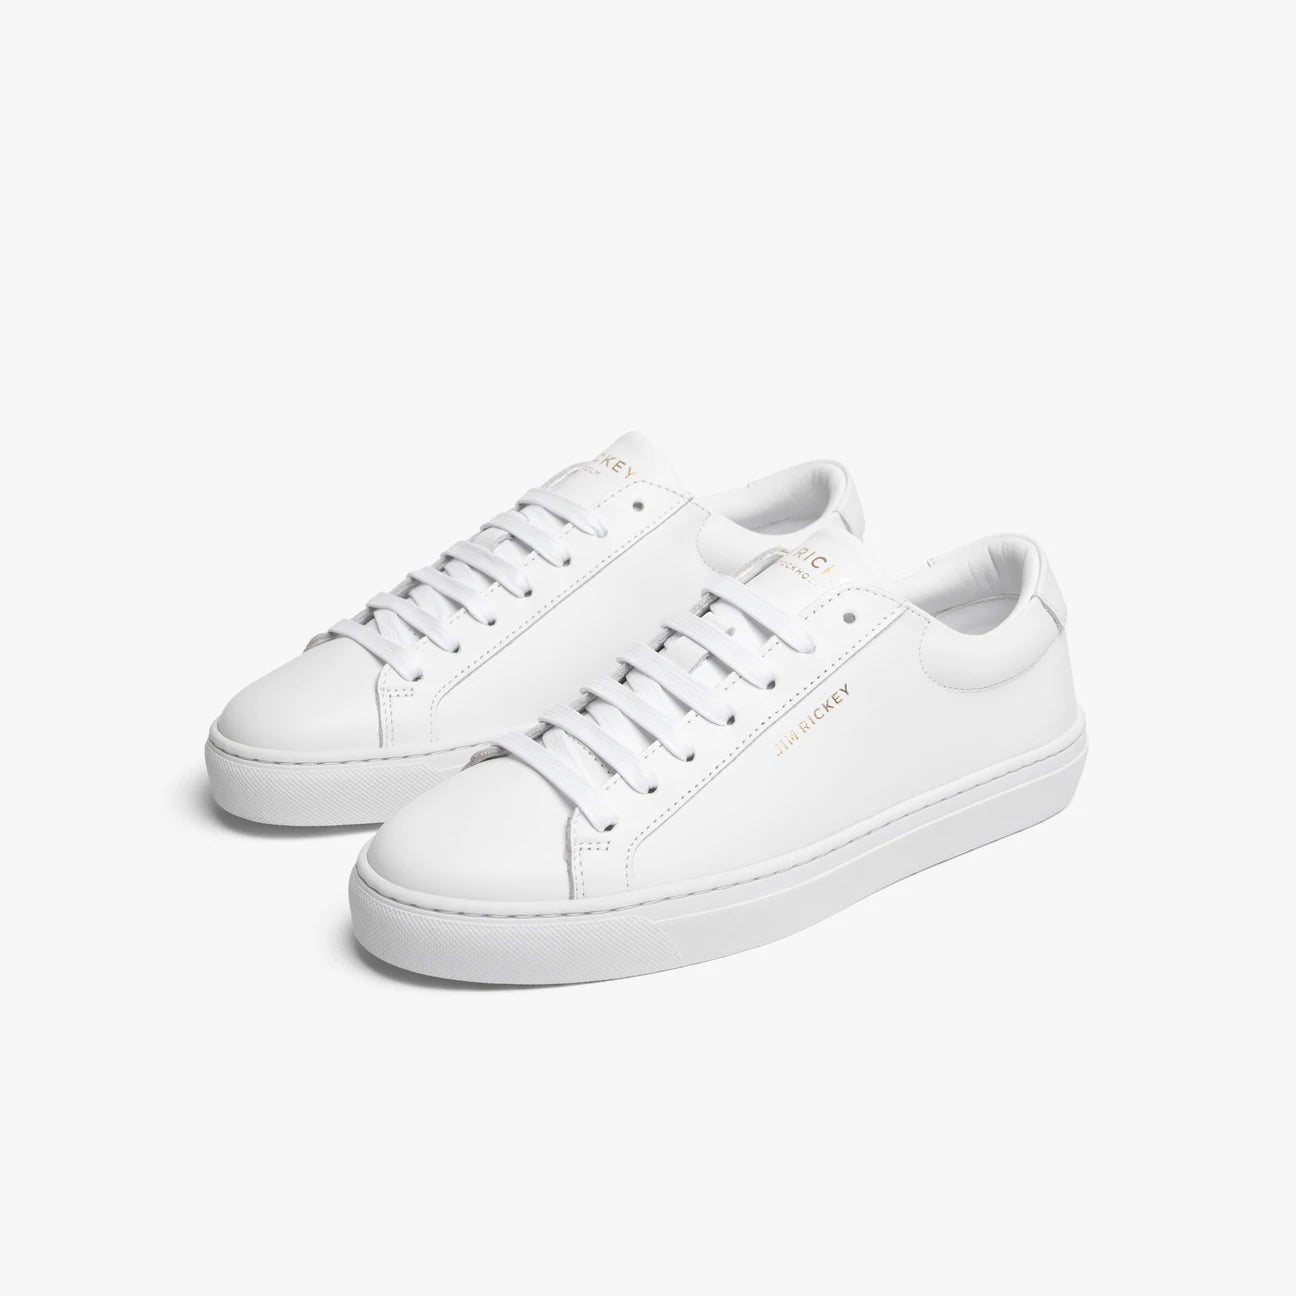 UNIKONCEPT Lifestyle Boutique and Lounge; Jim Rickey Spin leather sneakers in white